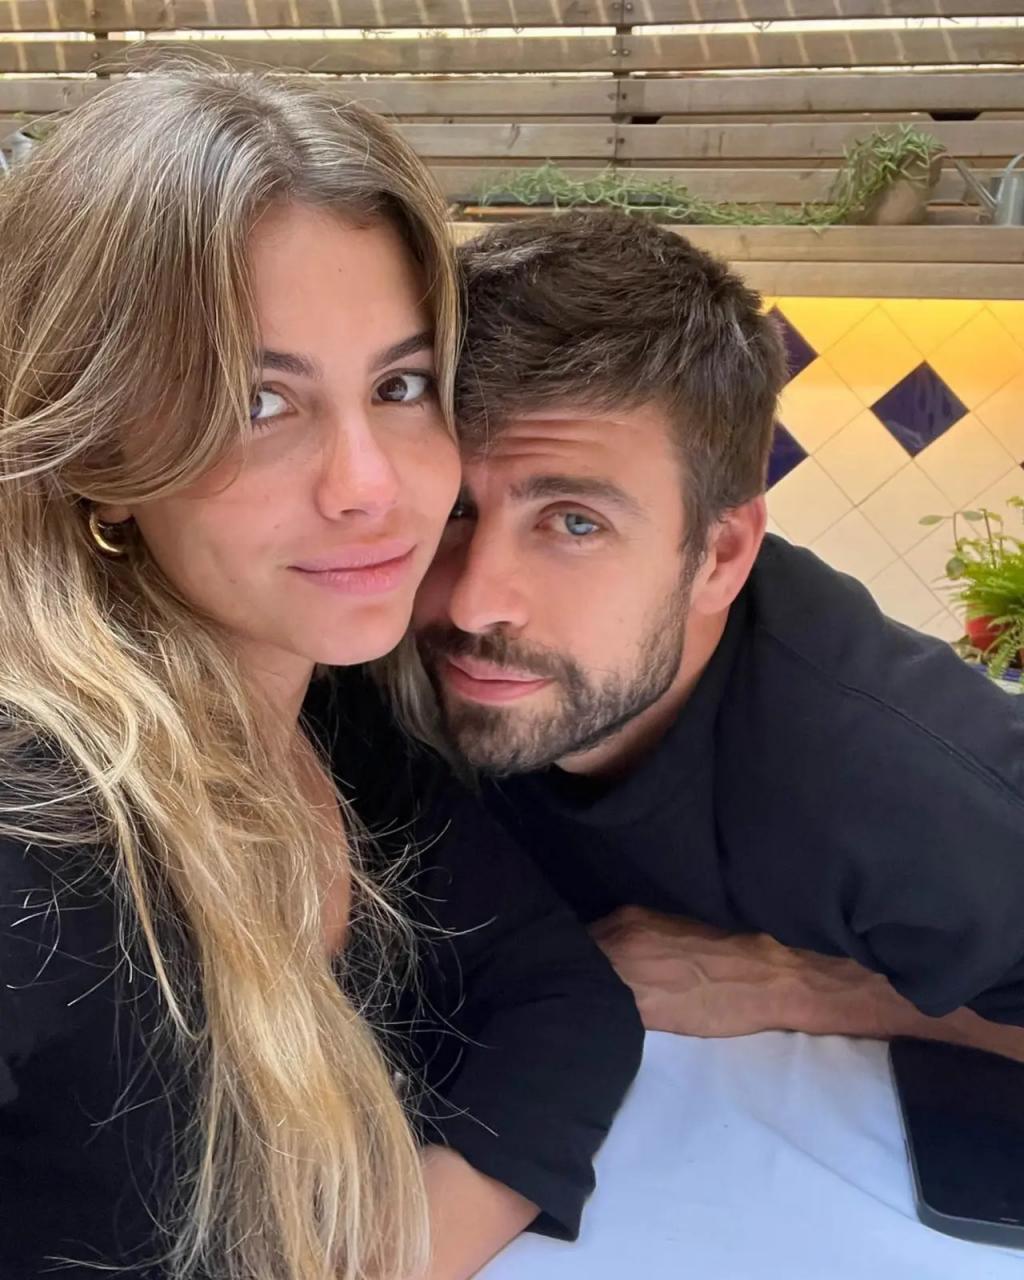 Gerard Pique goes Instagram-official with Clara Chia Marti after split from Shakira 